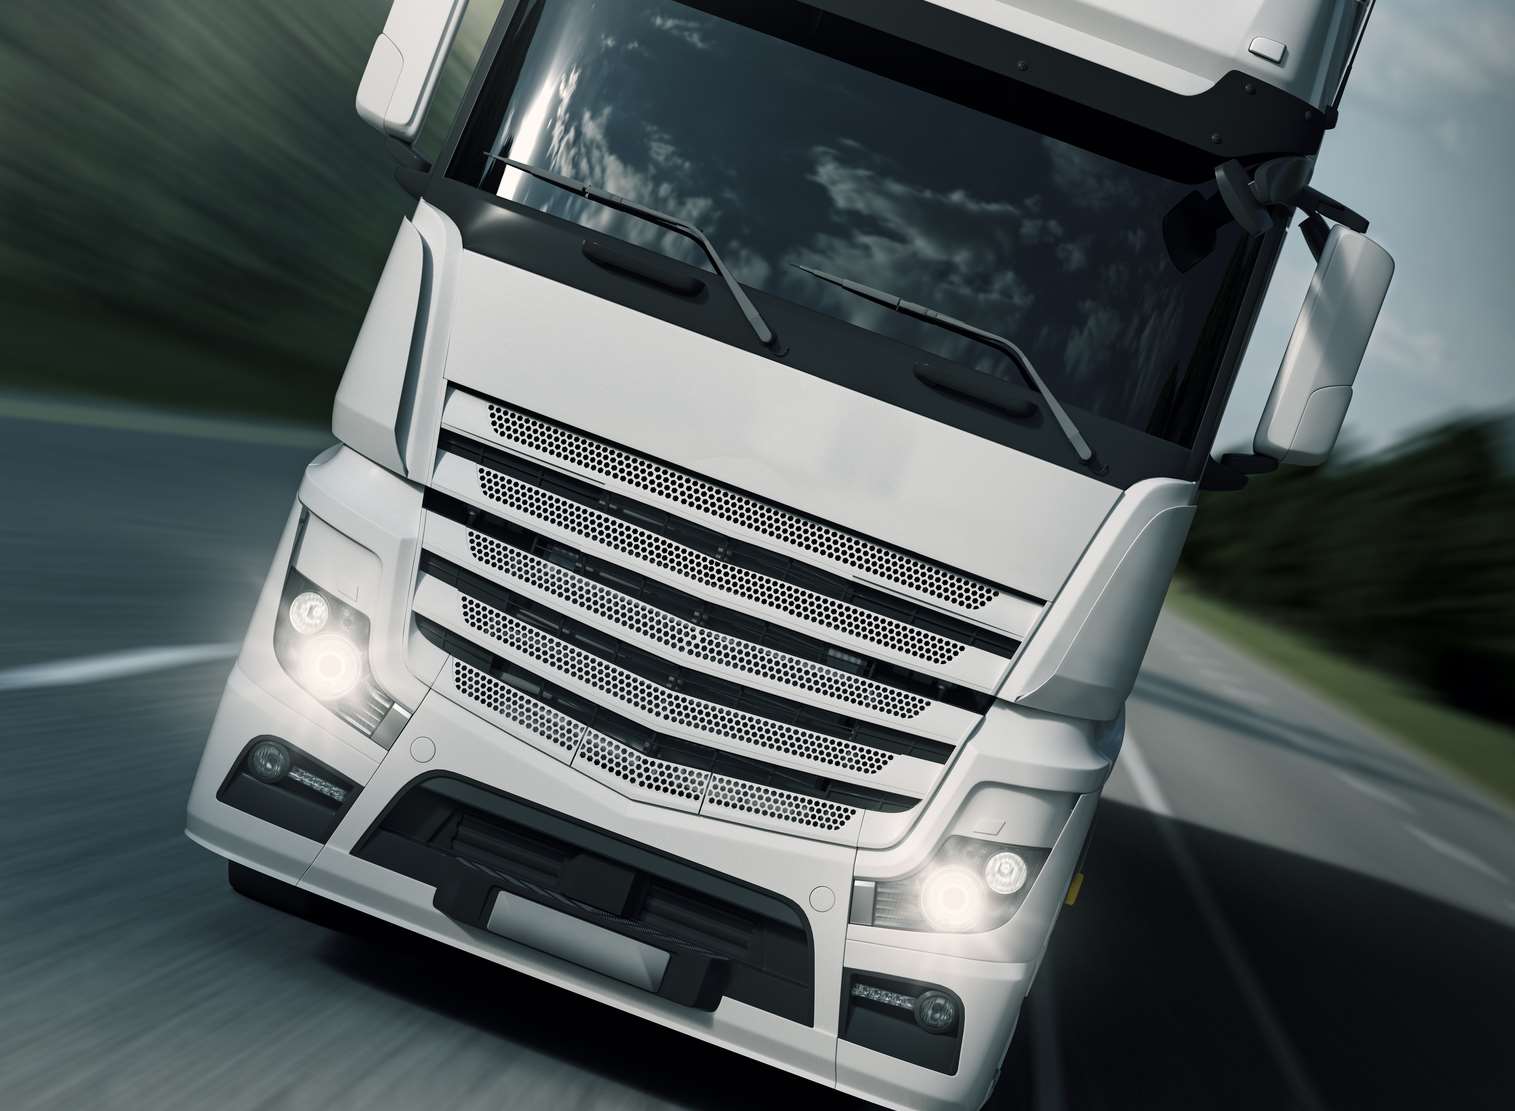 The lorry was seen swerving. Stock image.